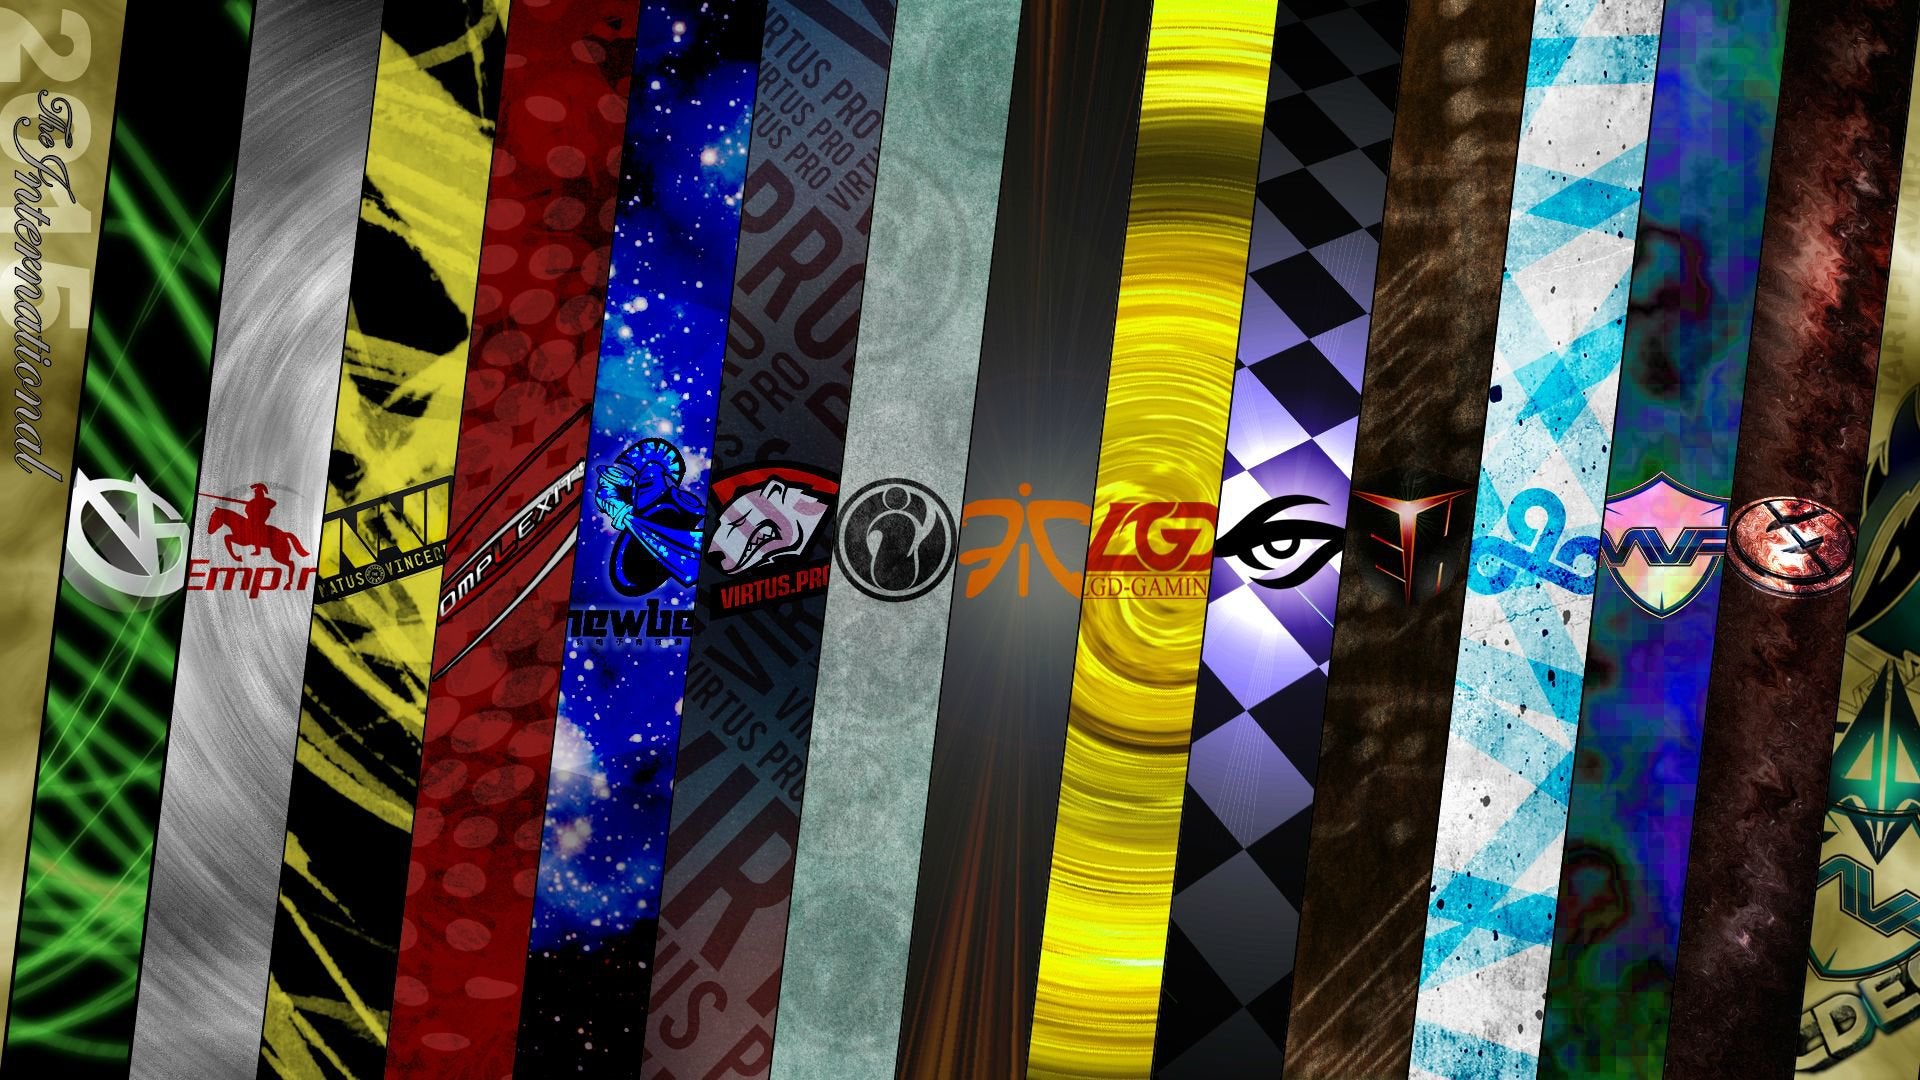 I M Not Great At Photoshop But Put Together This Ti5 Wallpaper For